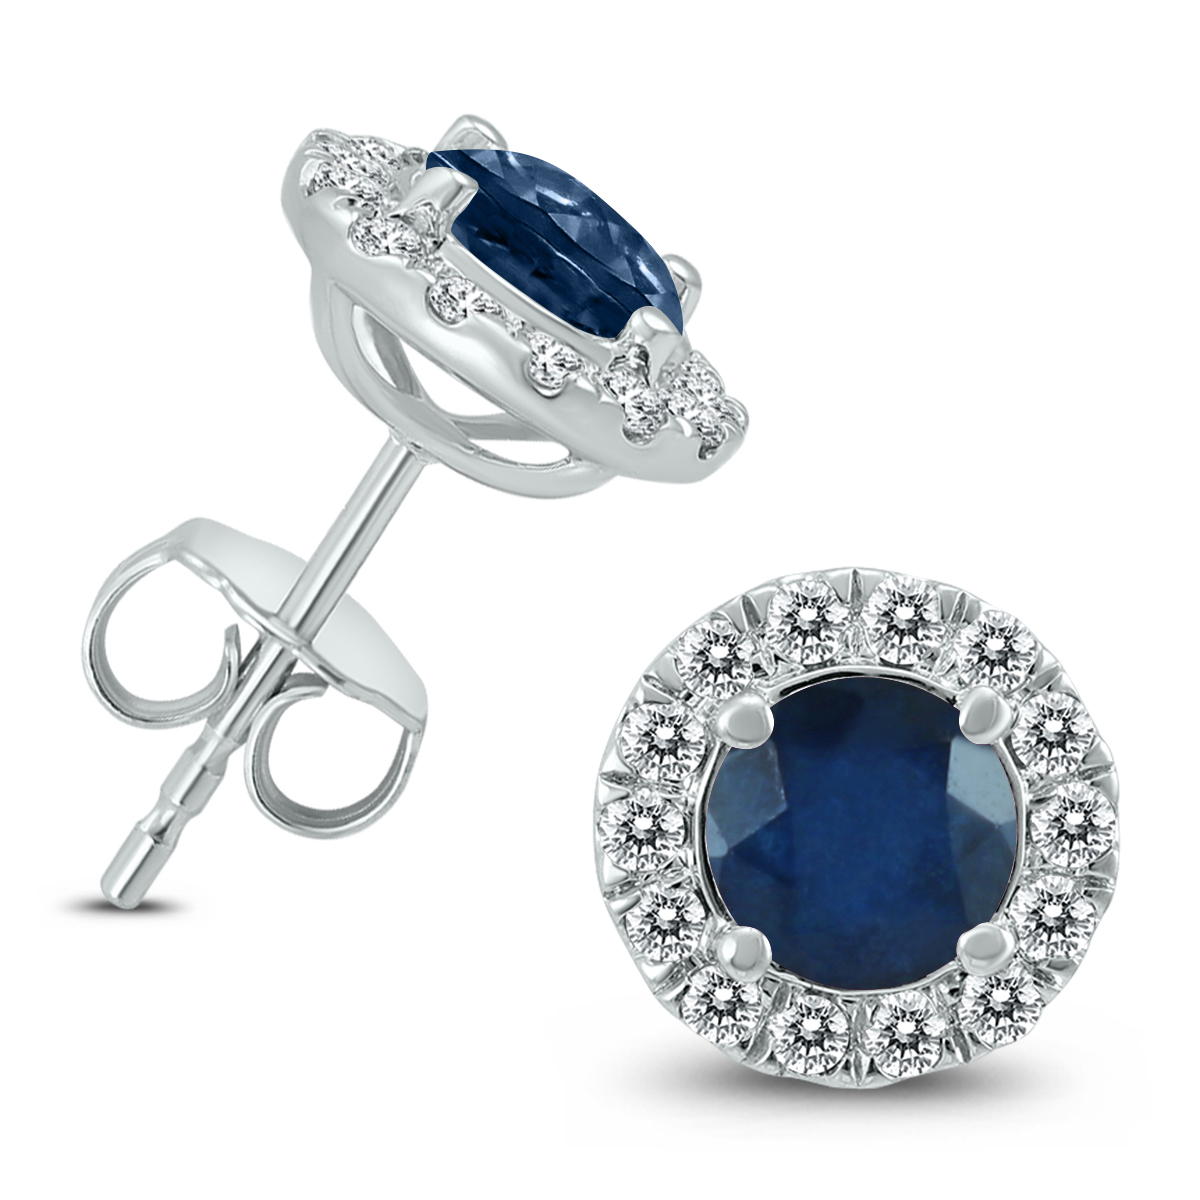 Genuine 1 3/4 Carat TW Natural Sapphire And Real Diamond Halo Earrings in 14K White Gold